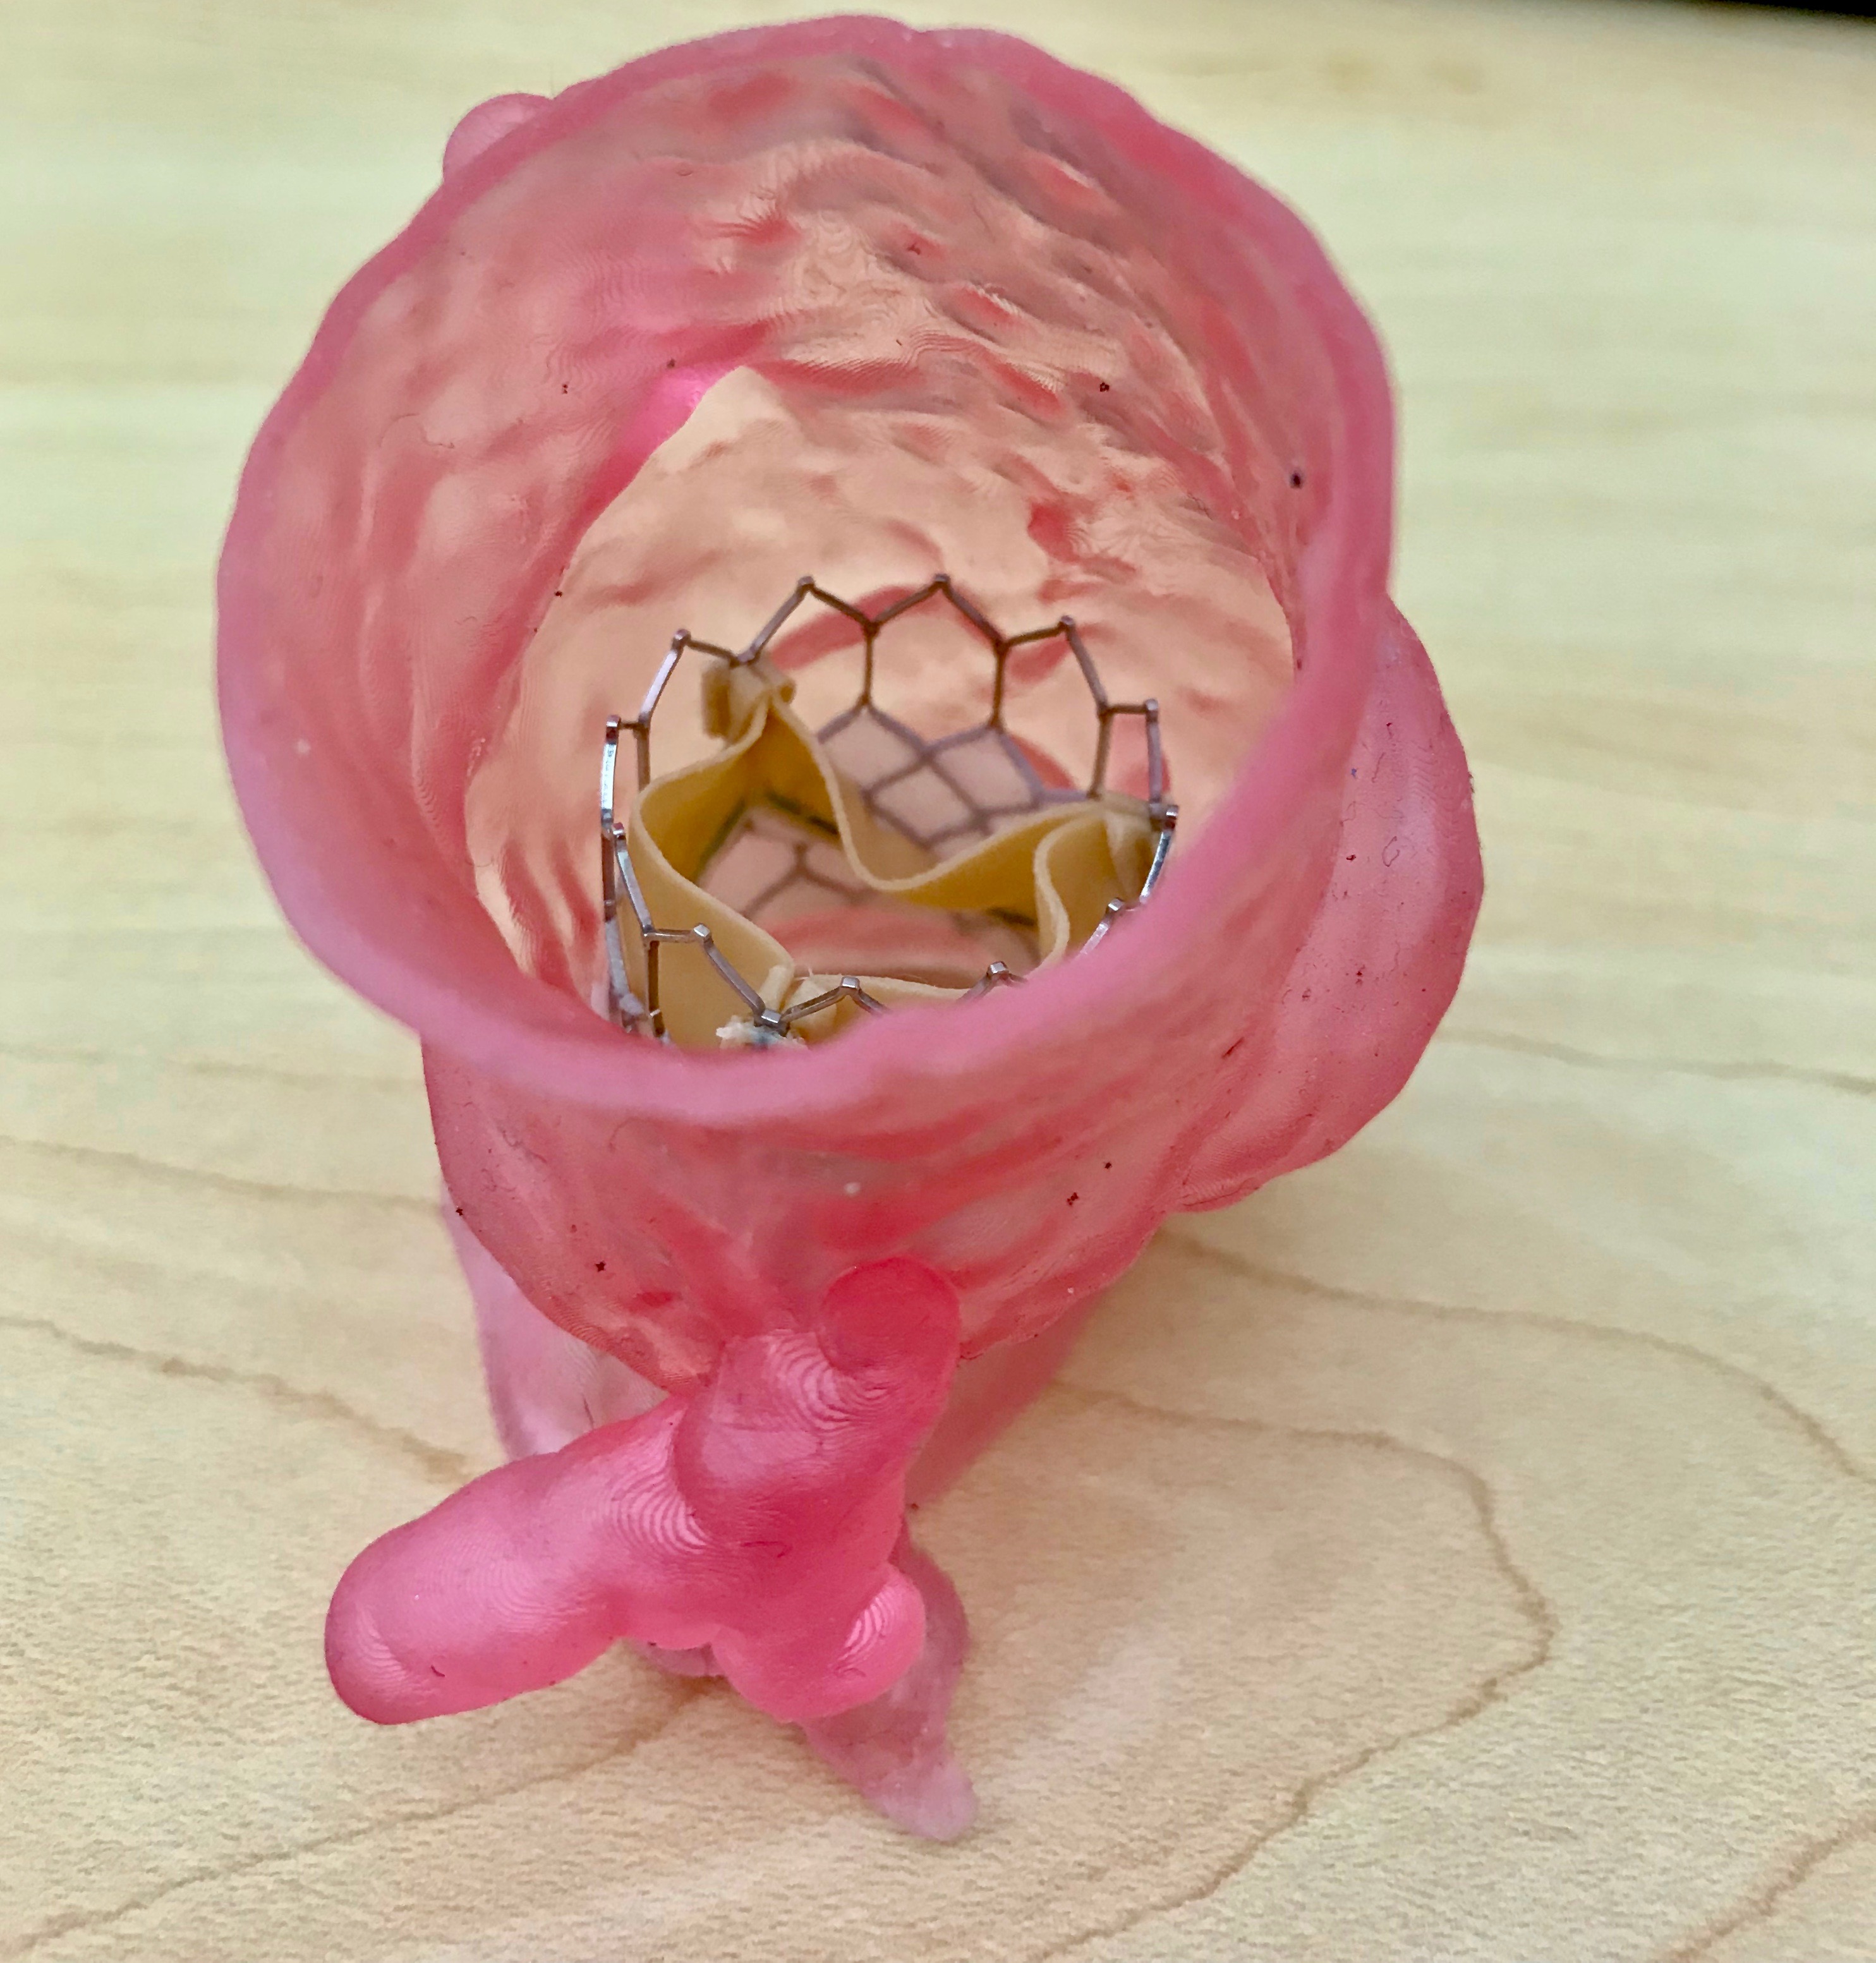 3D printed model of a patient$0027s aortic valve with a transcatheter aortic valve replacement (TAVR) bioprosthetic placed into the 3D printed model for procedural planning purposes. Photo via VA Puget Sound Health Care System.